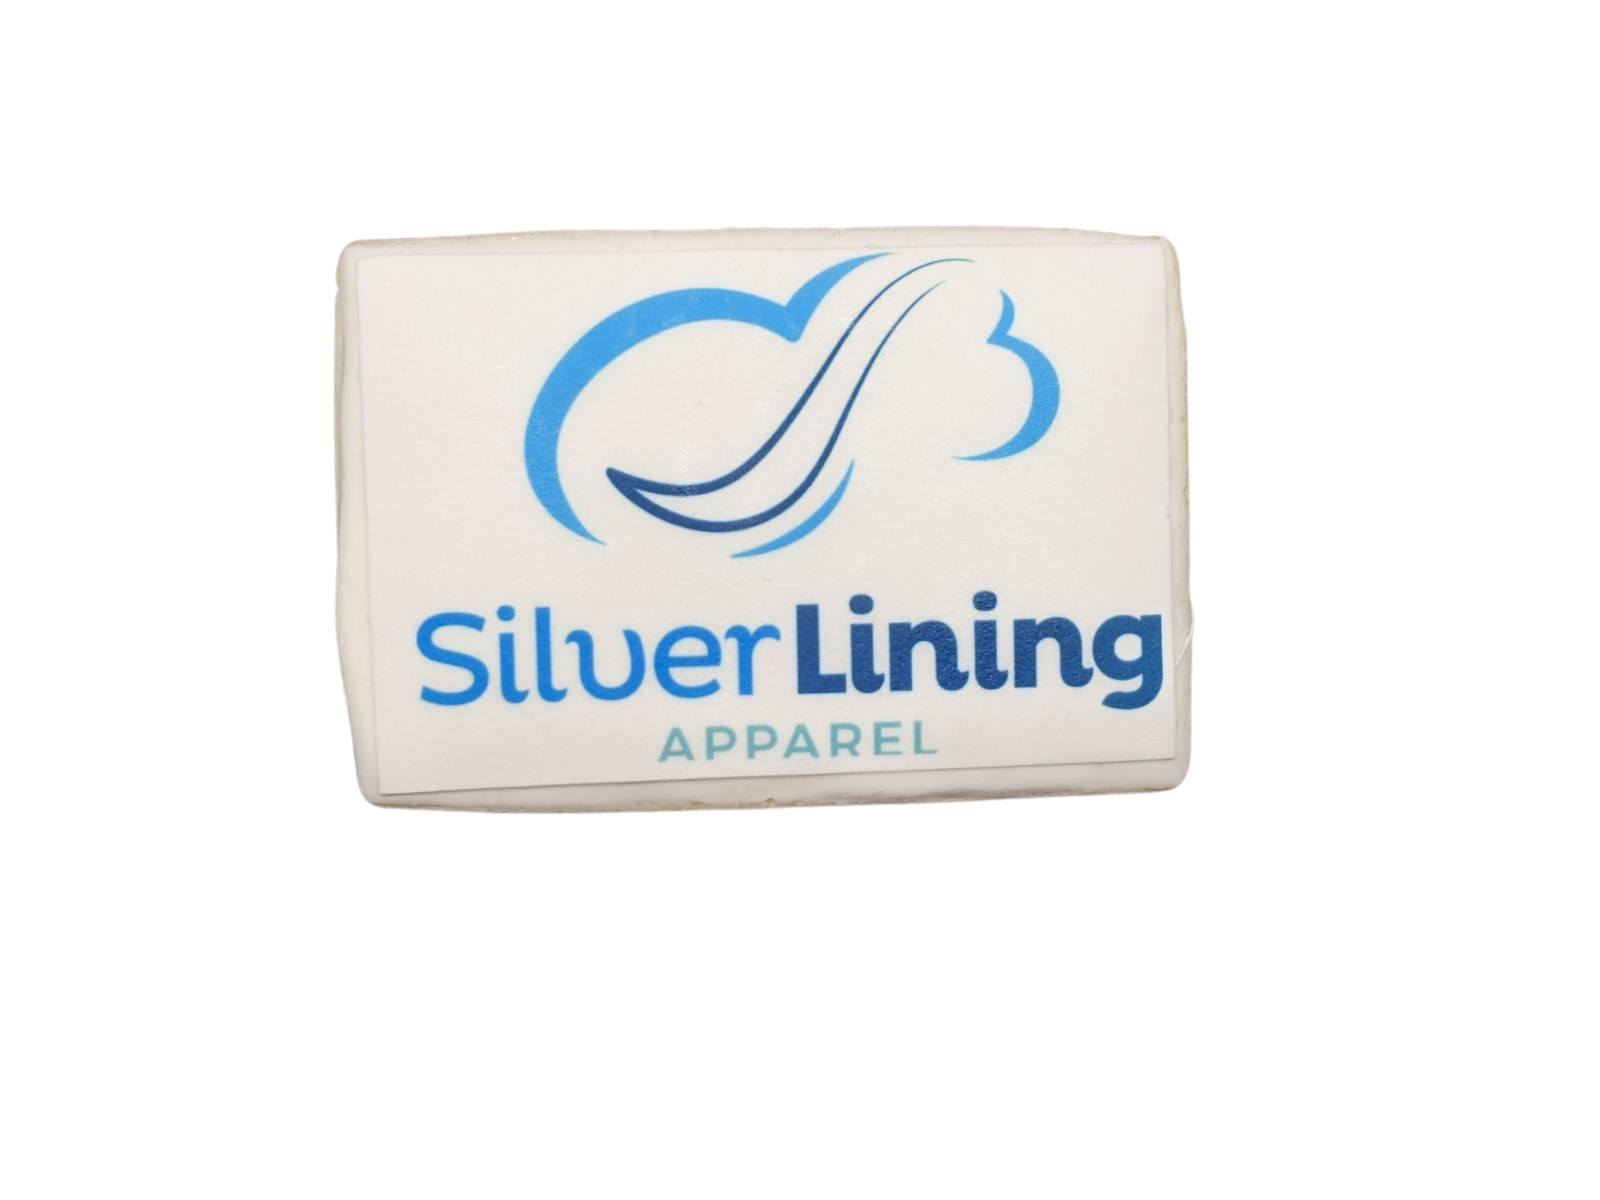 Silver Lining Apparel Logo on Cookie